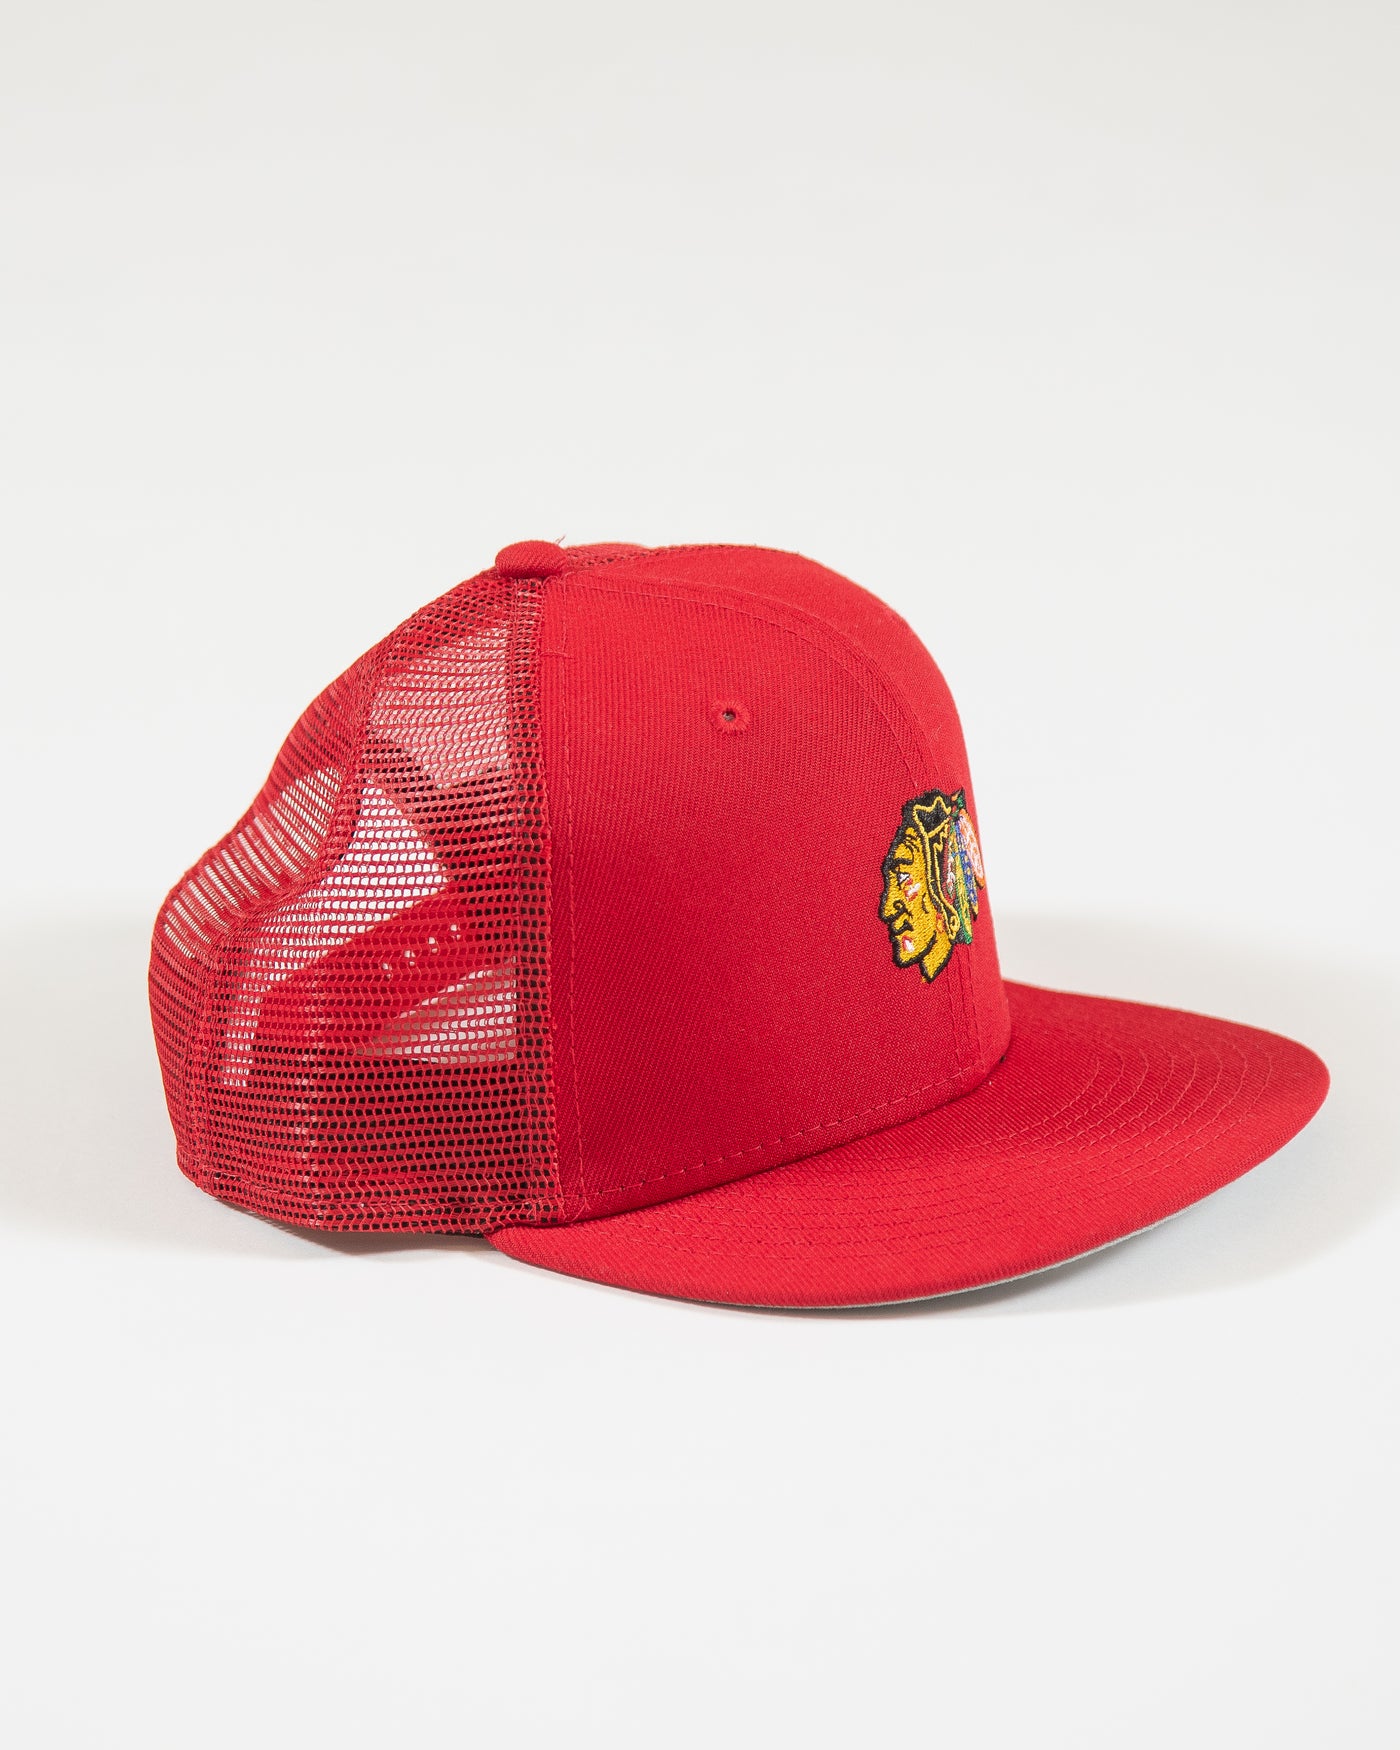 red youth New Era trucker cap with Chicago Blackhawks primary logo embroidered on front - right angle lay flat